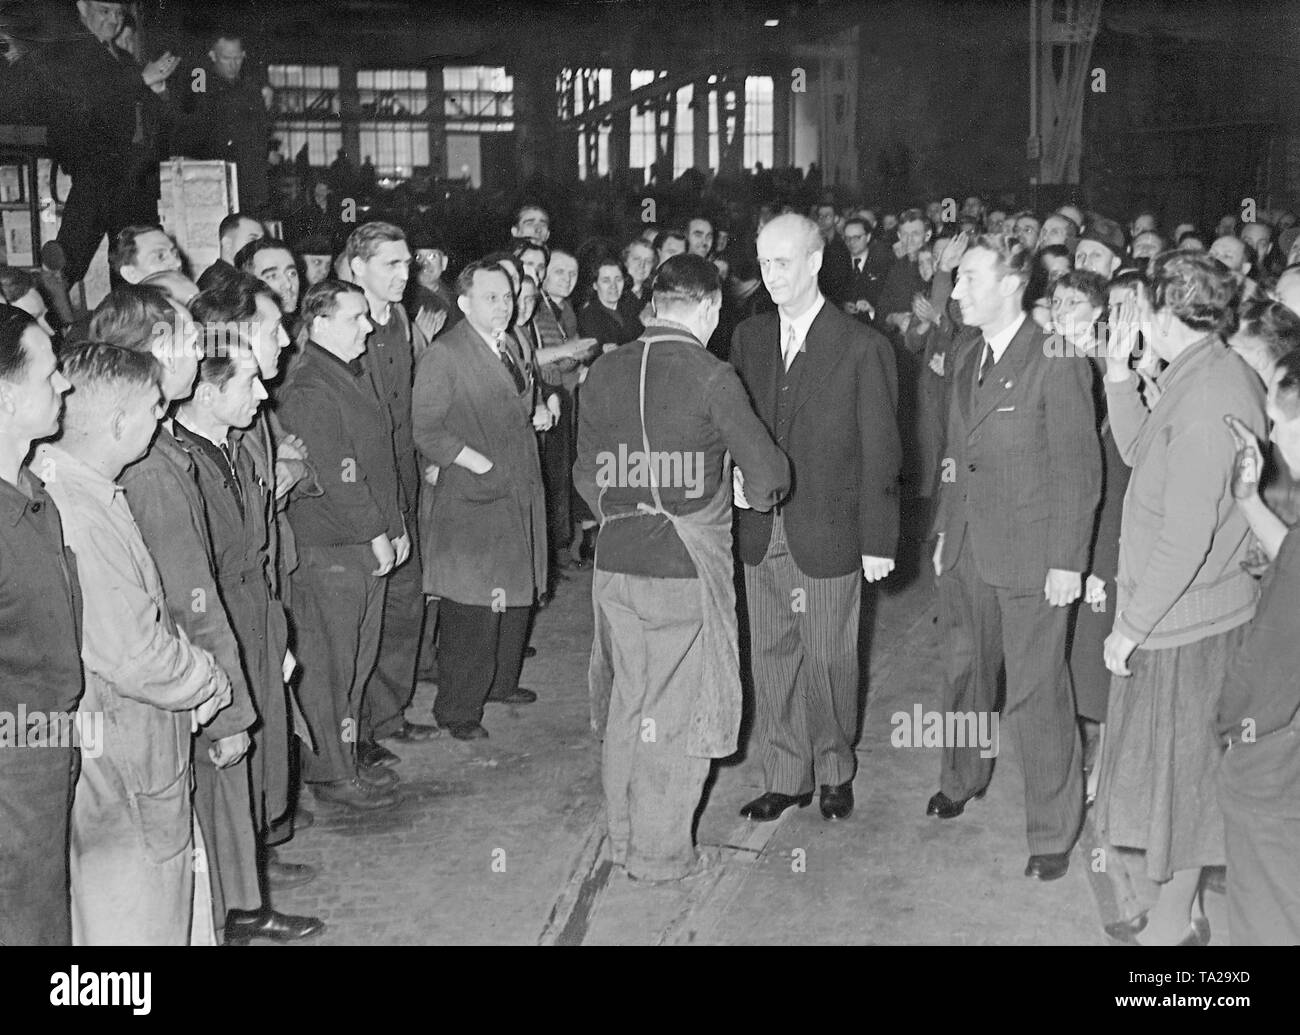 Wilhelm Furtwaengler, German conductor and composer, gave a so-called Werkspausenkonzert with his Berlin Philharmonic at the AEG in the Brunnenstrasse. In the picture, one of the workers thanks in the name of his colleagues for the performance. The concert was organized by the Nazi organization 'Kraft durch Freude' ('Strength through Joy'). Stock Photo